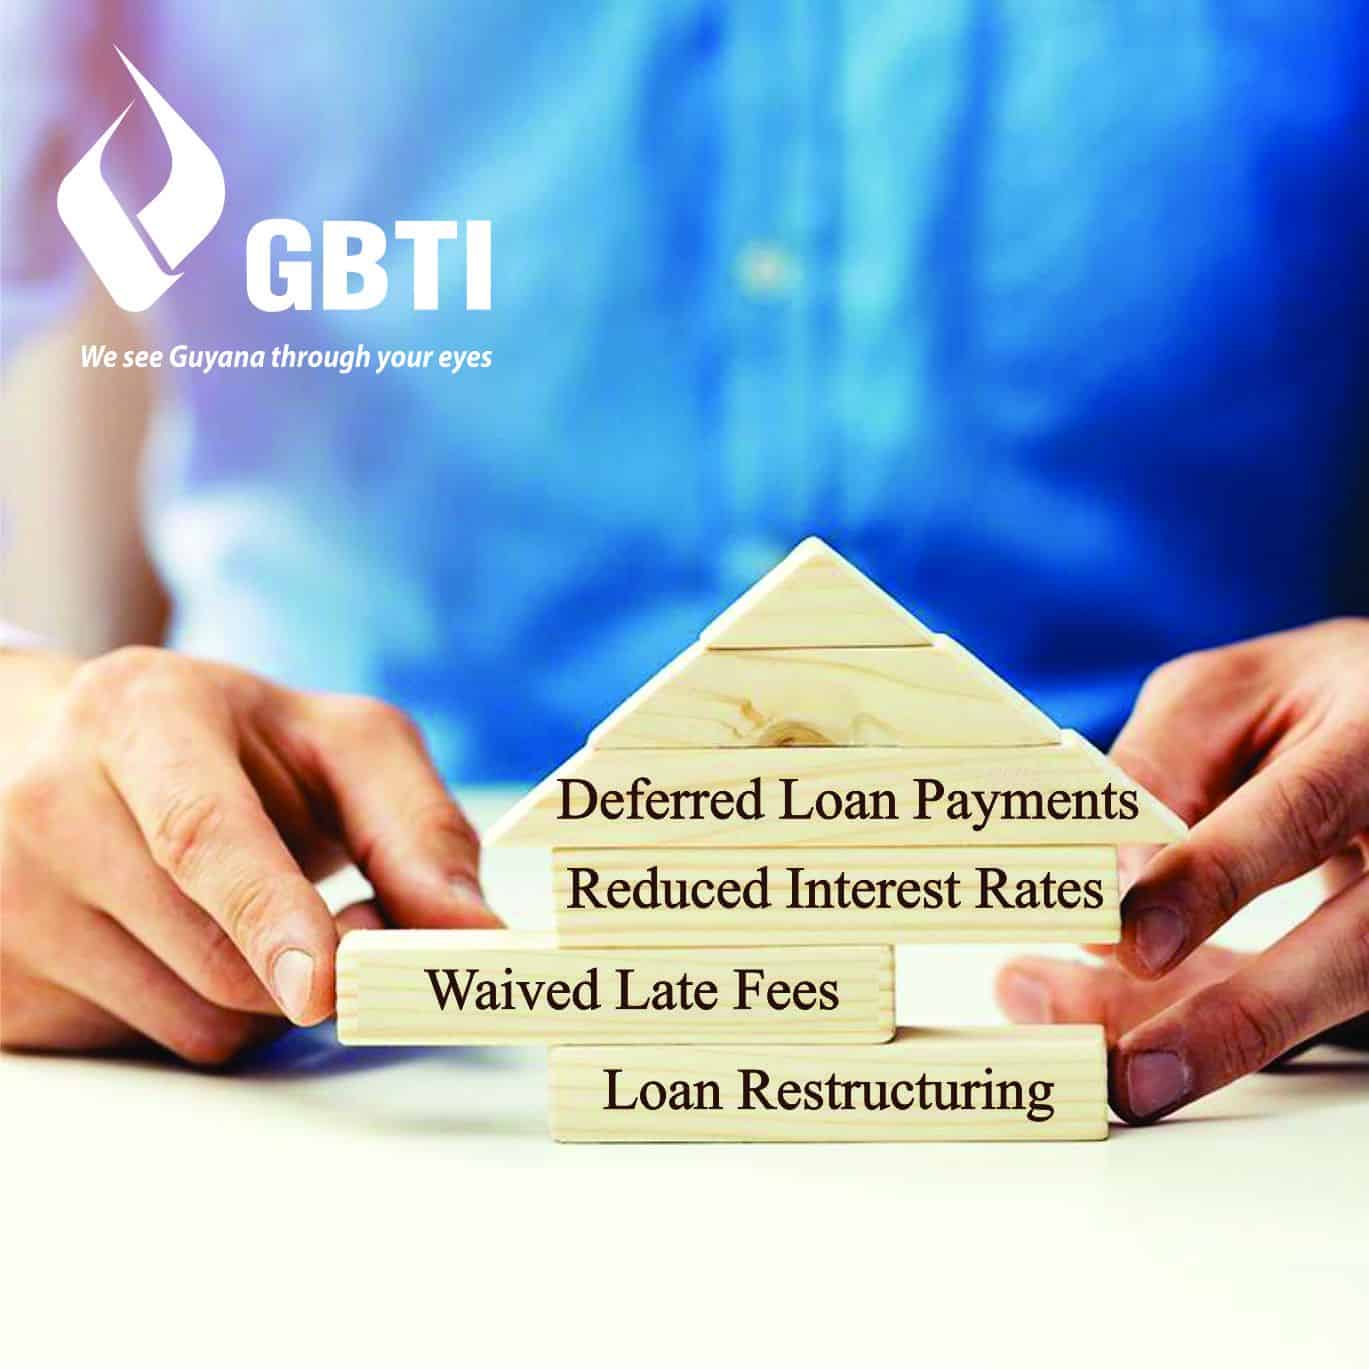 GBTI waives penalty interests and late payment fees, reduces interest rates, defers loan ...